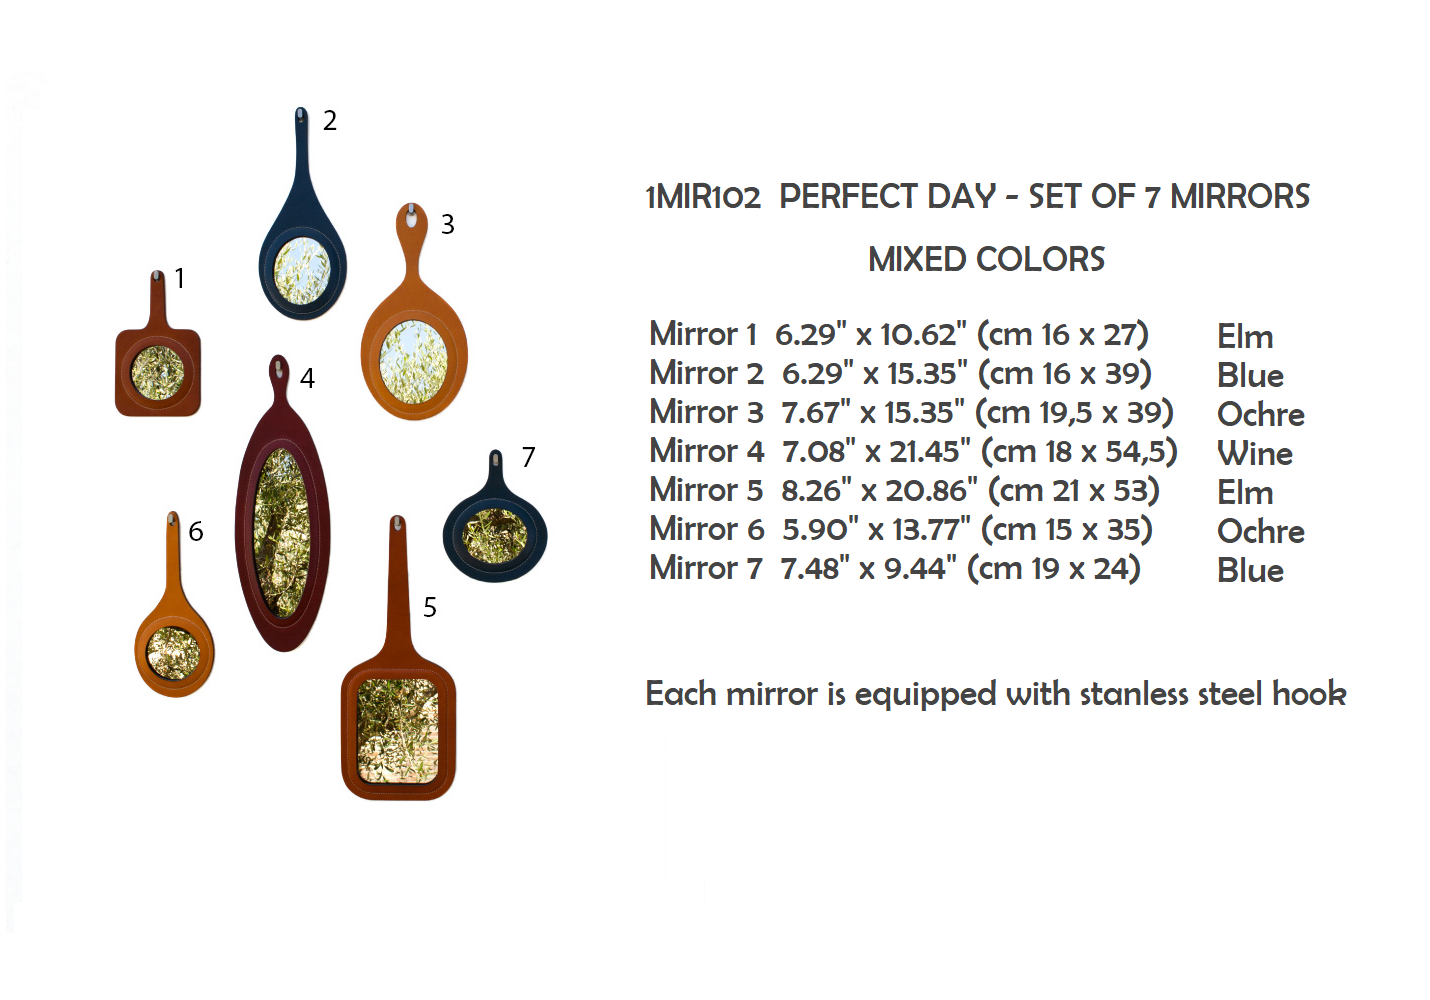 Perfect Day Mirrors / Wall Art